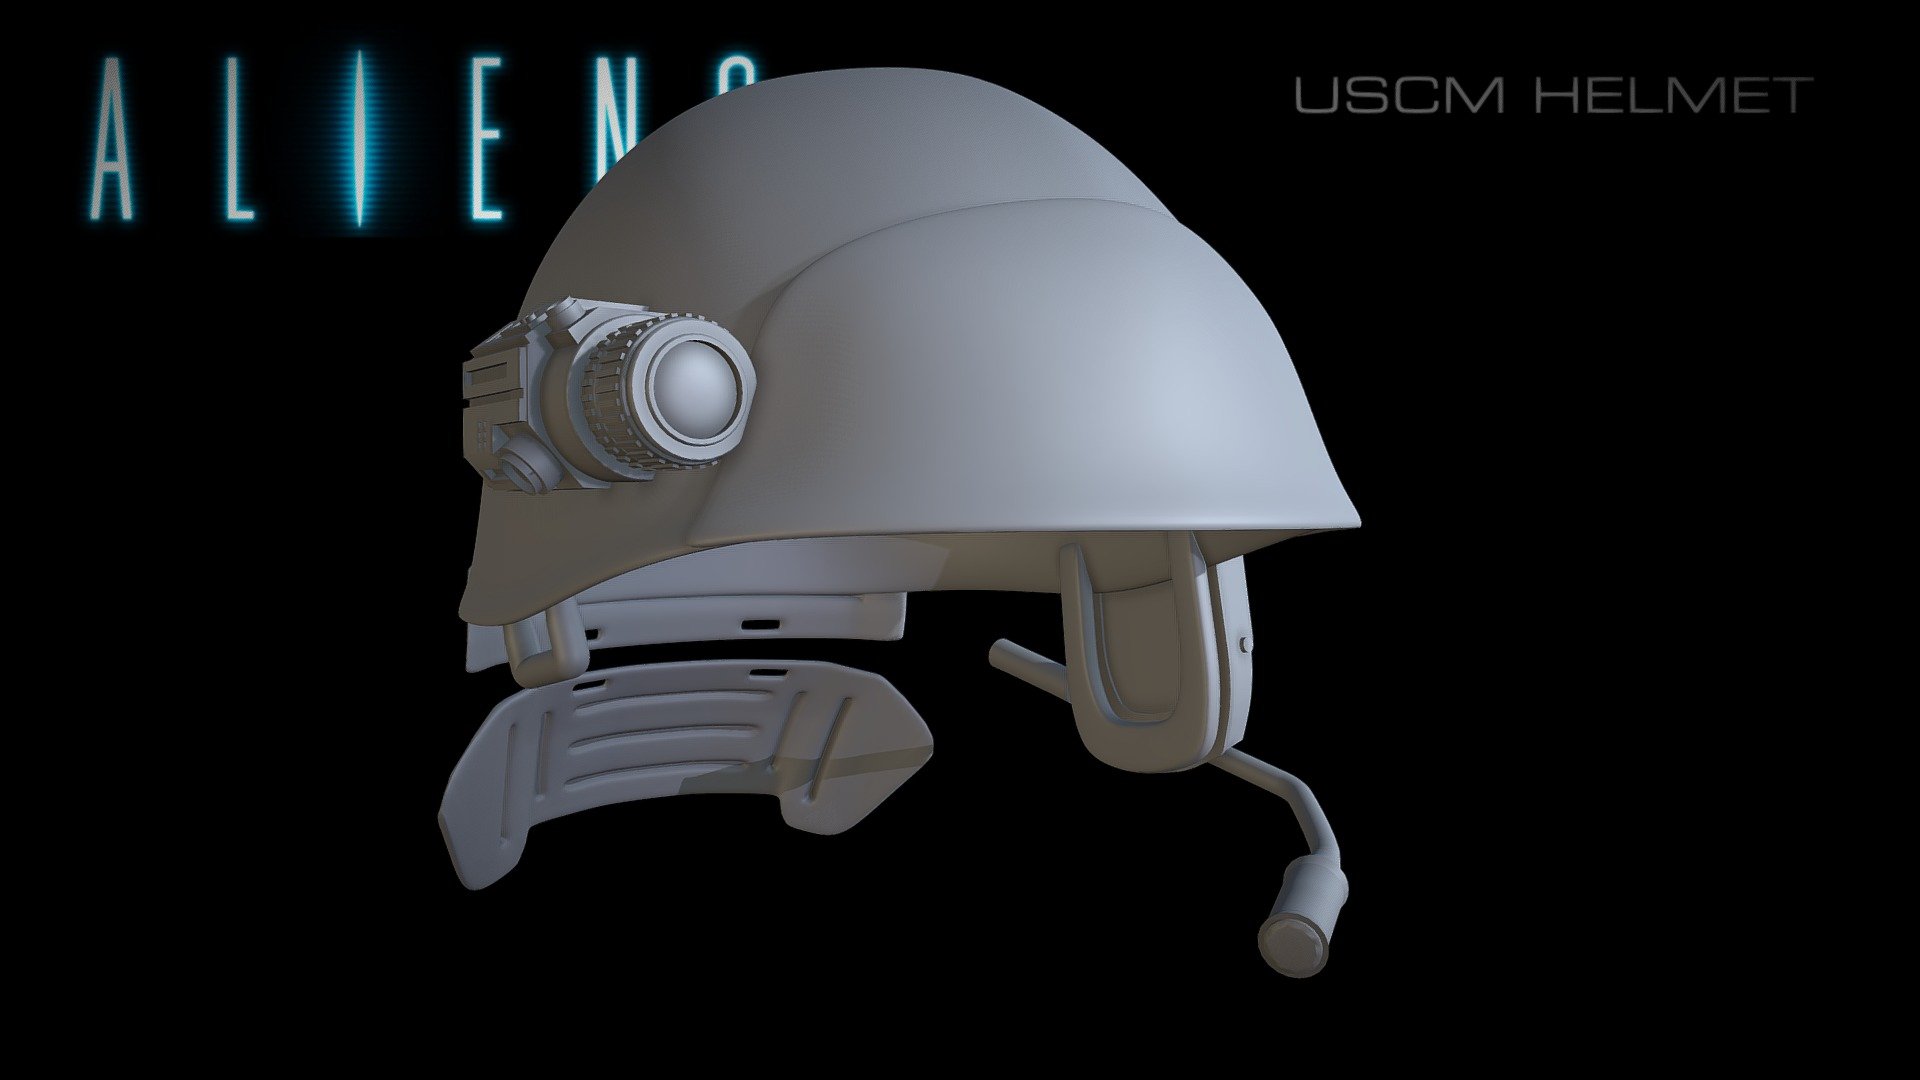 &ldquo;Get on the ready line marines! &ldquo;

A few years back I modelled a USCM helmet for the Neca figures and due to the size the detail was lacking. Version 1 here  https://sketchfab.com/3d-models/colonial-marine-helmet-81e844129f8c4dafaa9e7486011d13fe

I decided to revisit the model and give it an upgrade and OMG do I love it now! I'll be offering this as a 3D print file on my Etsy soon :) 

Thanks for looking :) - Colonial Marine Helmet 2 - 3D model by paulelderdesign 3d model